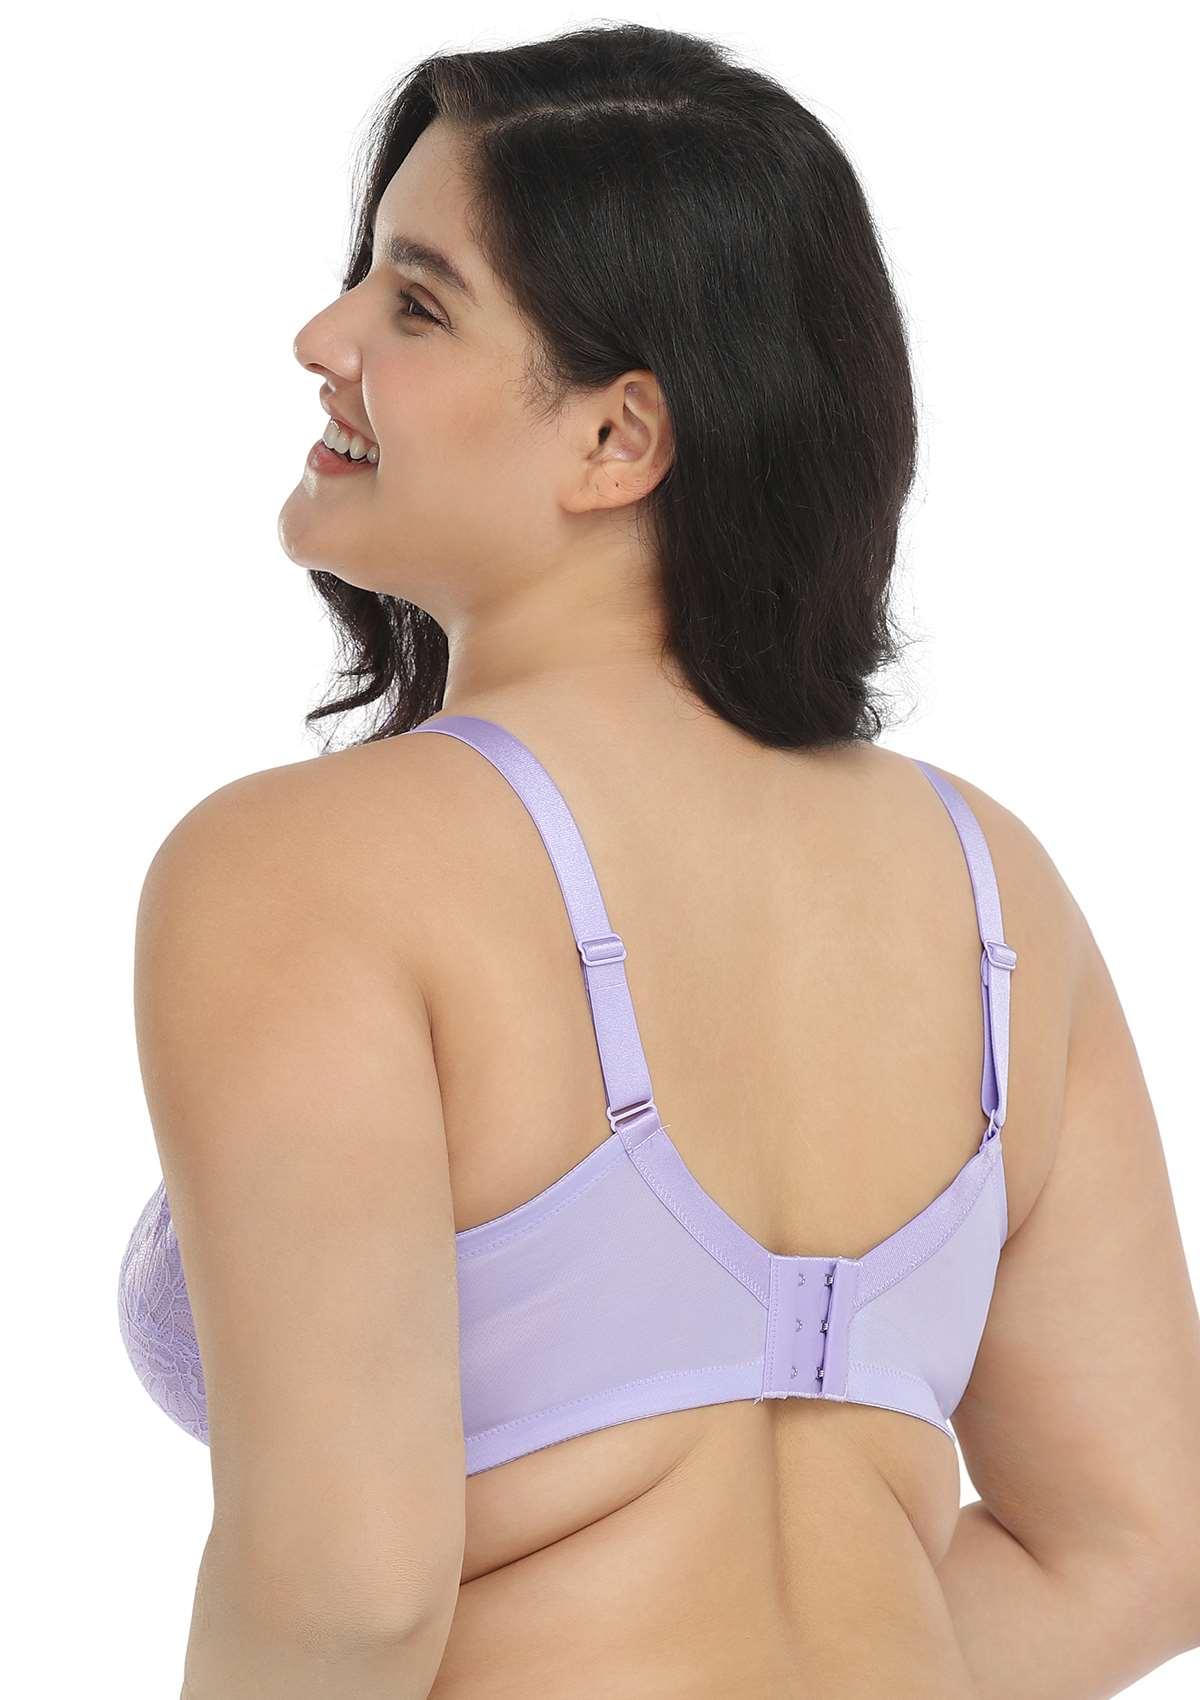 HSIA Blossom Transparent Lace Bra: Plus Size Wired Back Smoothing Bra - Light Purple / 42 / C